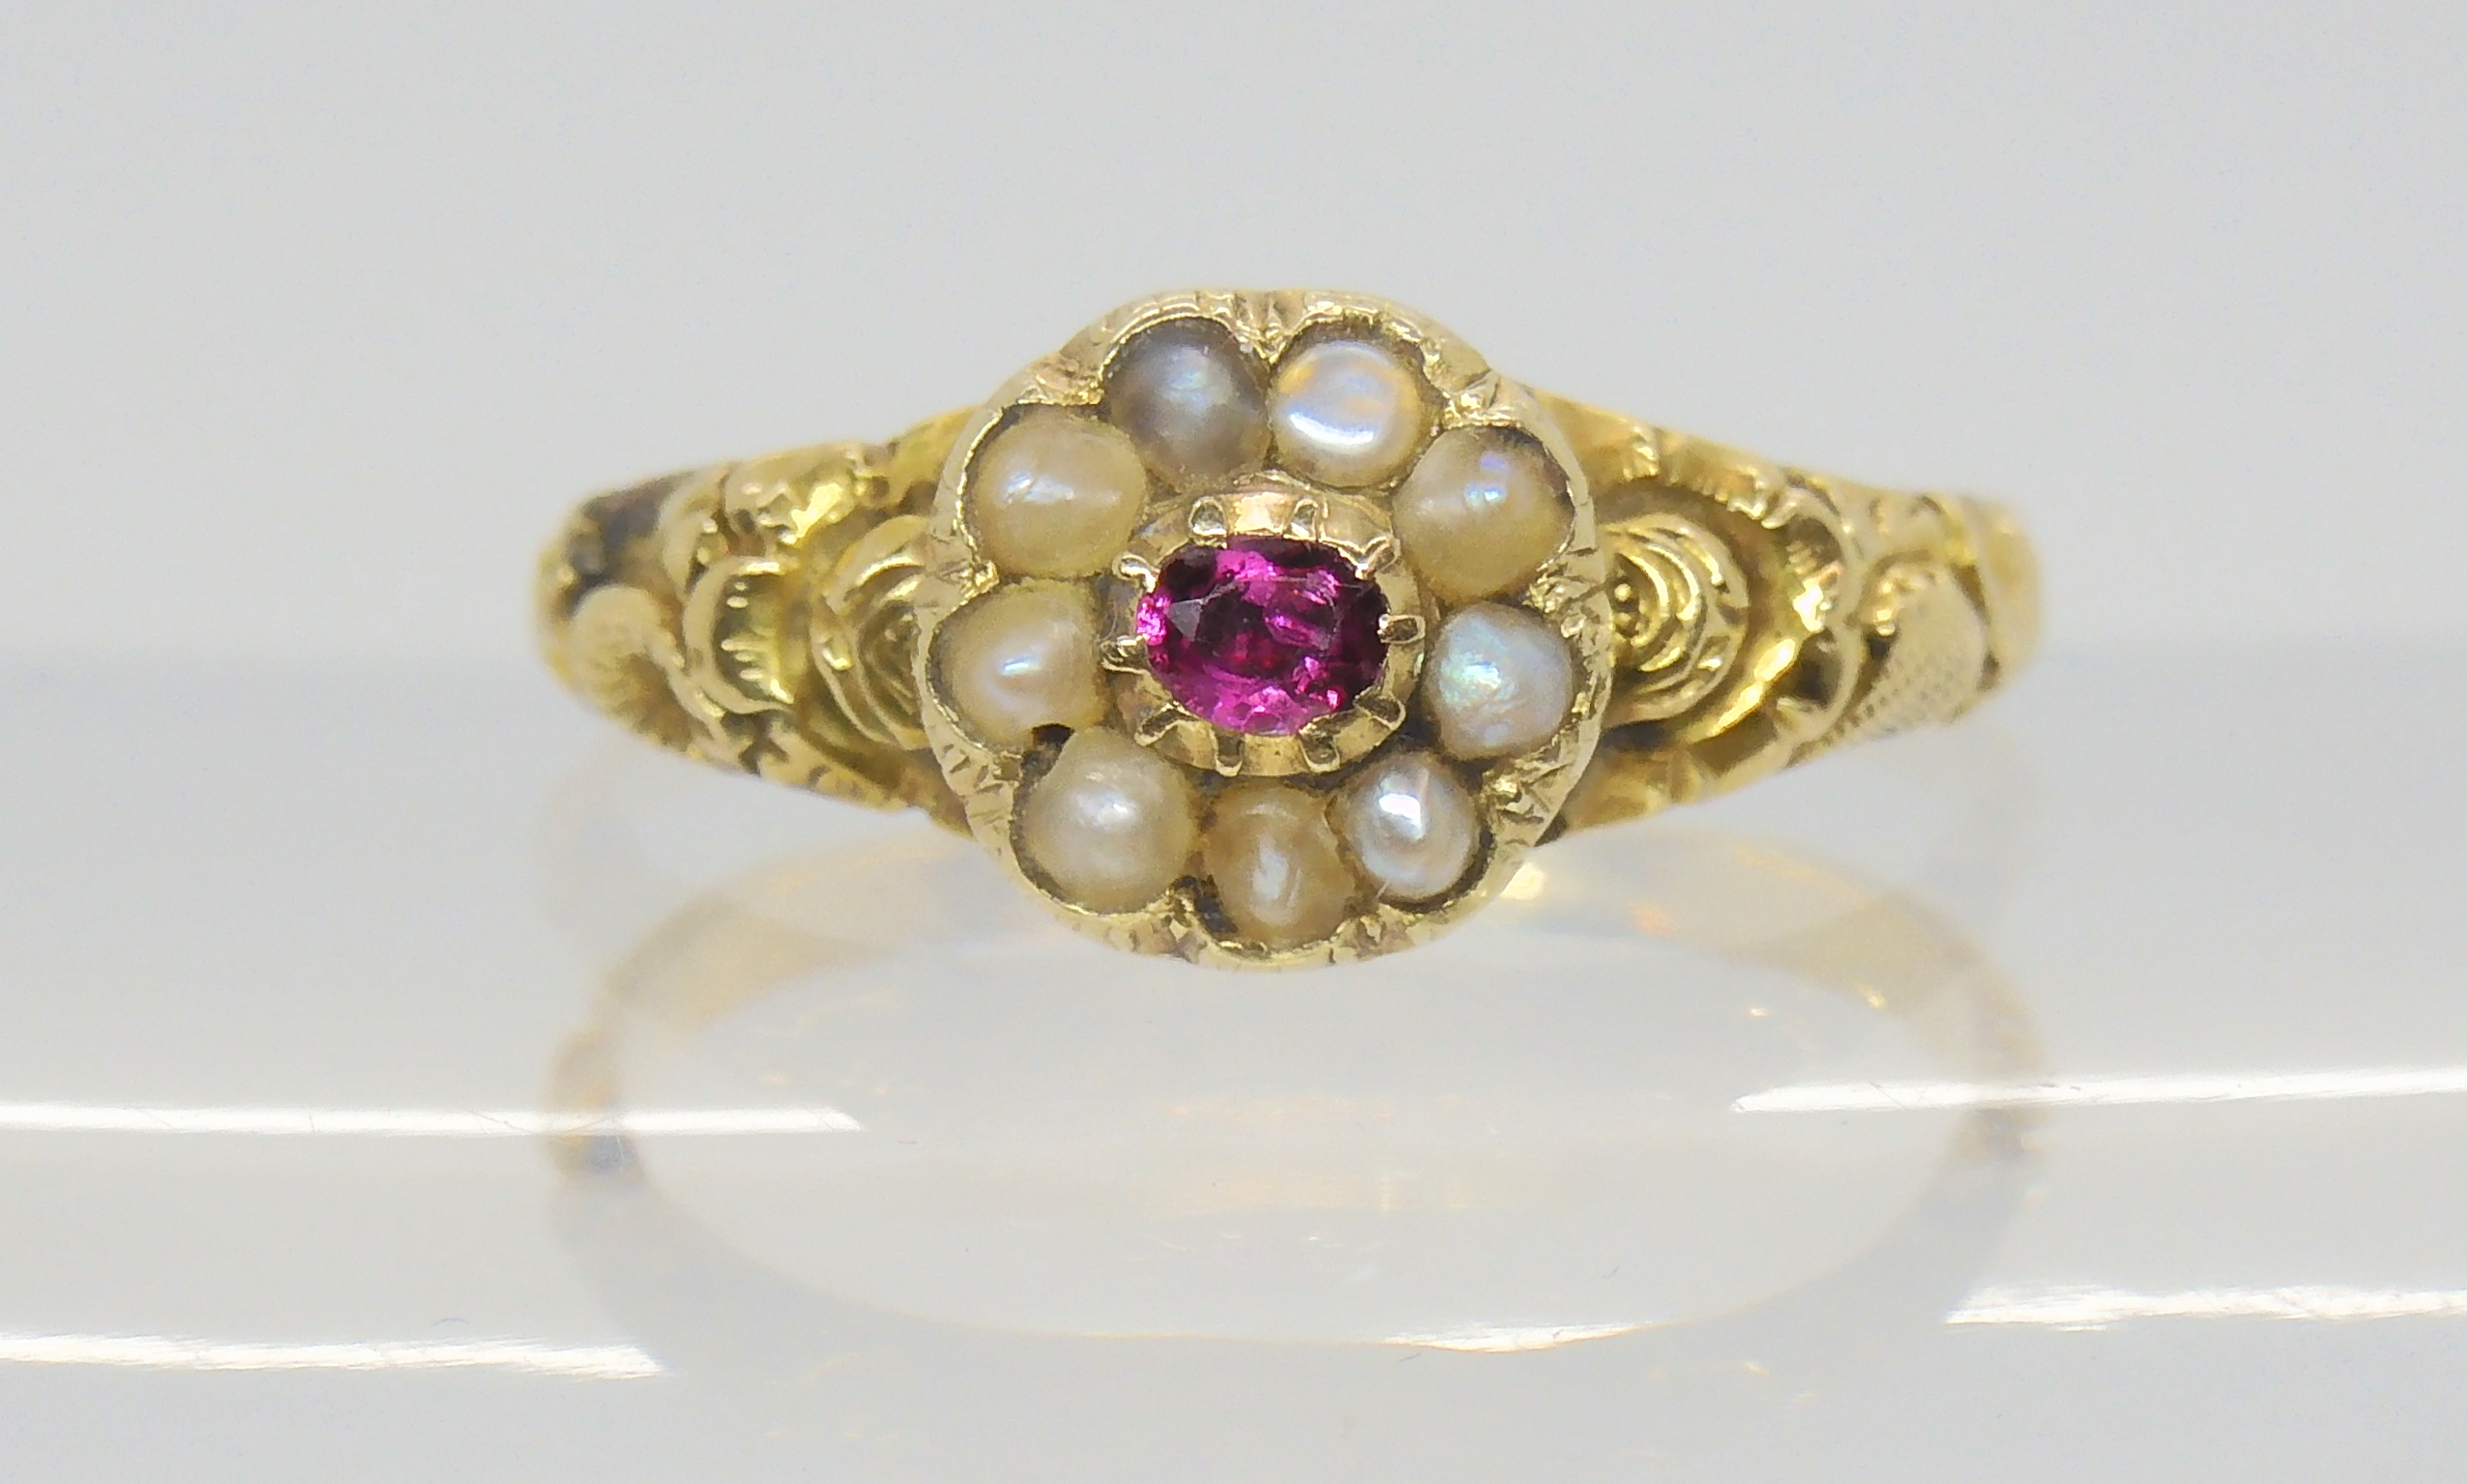 A Victorian locket ring, the hinged cover set with a ruby and pearls, with a yellow metal flower